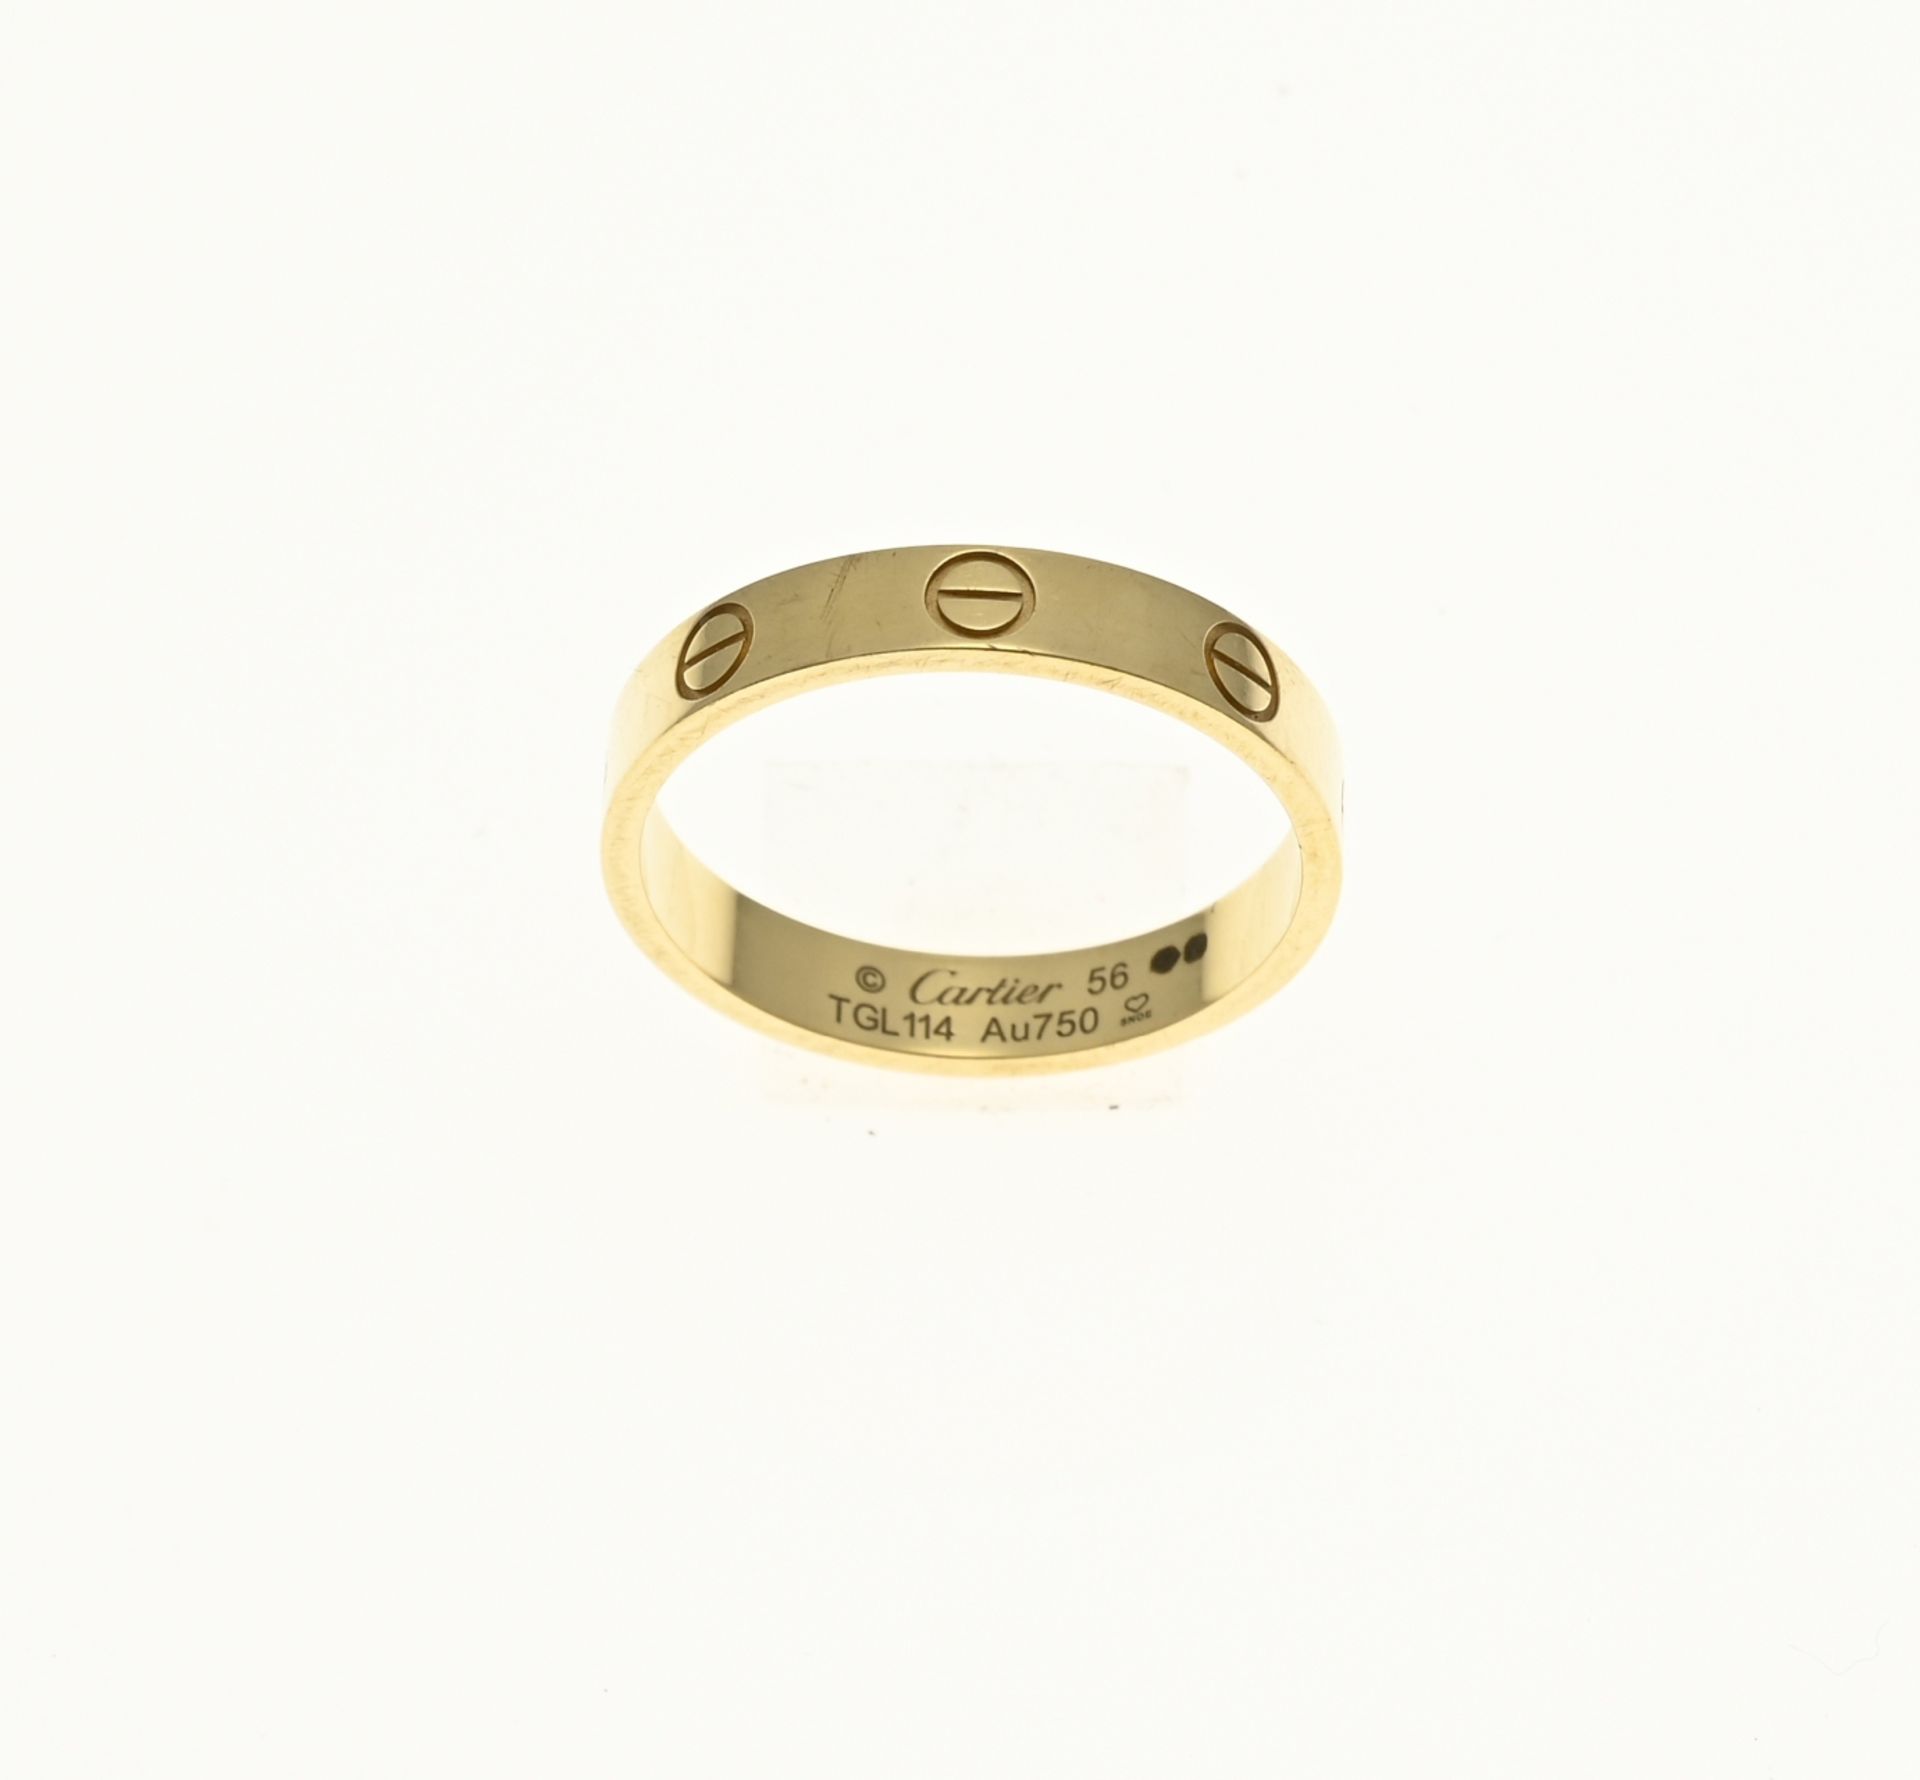 Gold Cartier ring